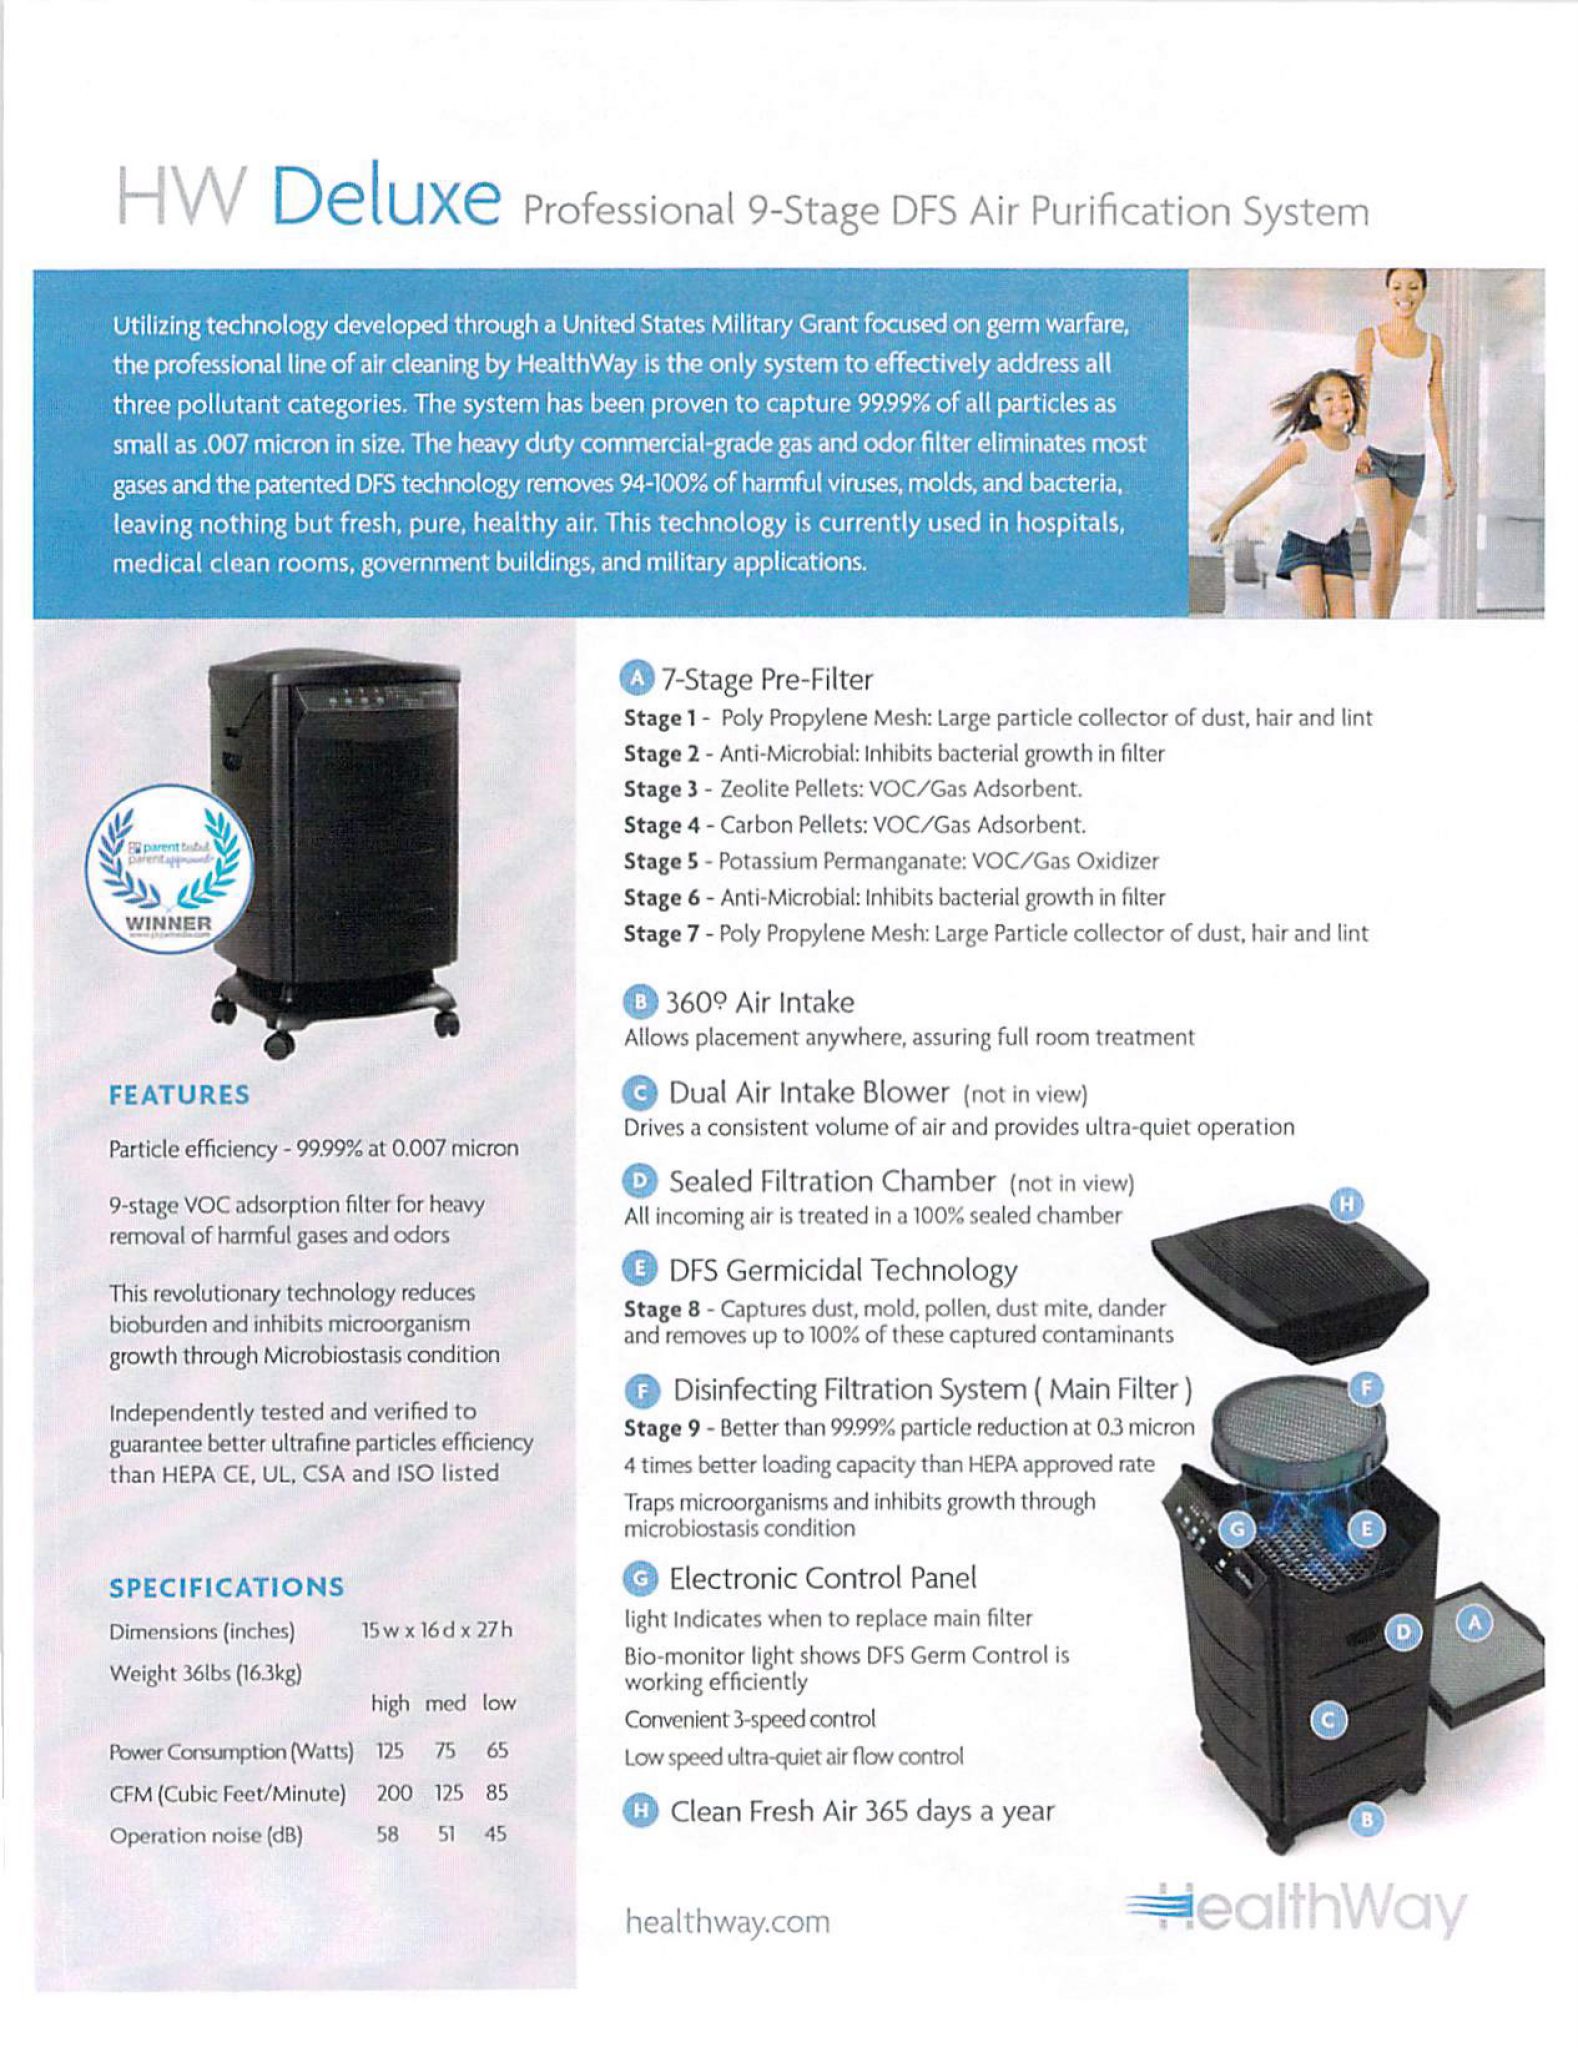 The Healthway Air Purifier Advanced Water Solutions